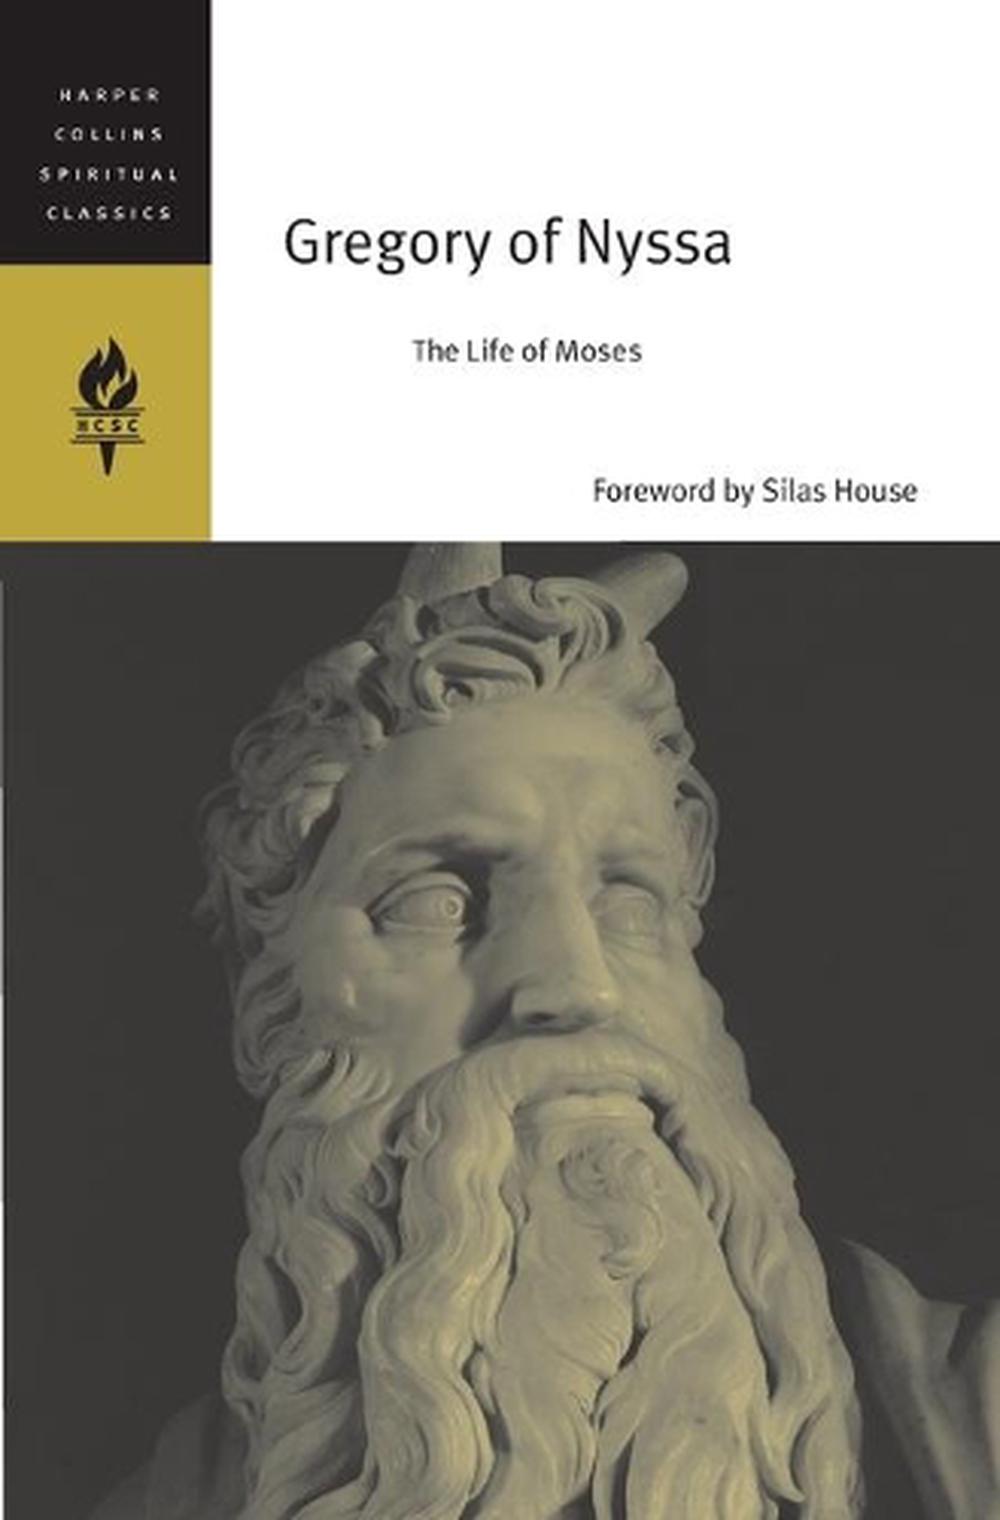 Gregory of Nyssa The Life of Moses by Gregory of Nyssa (English) Paperback Book 9780060754648